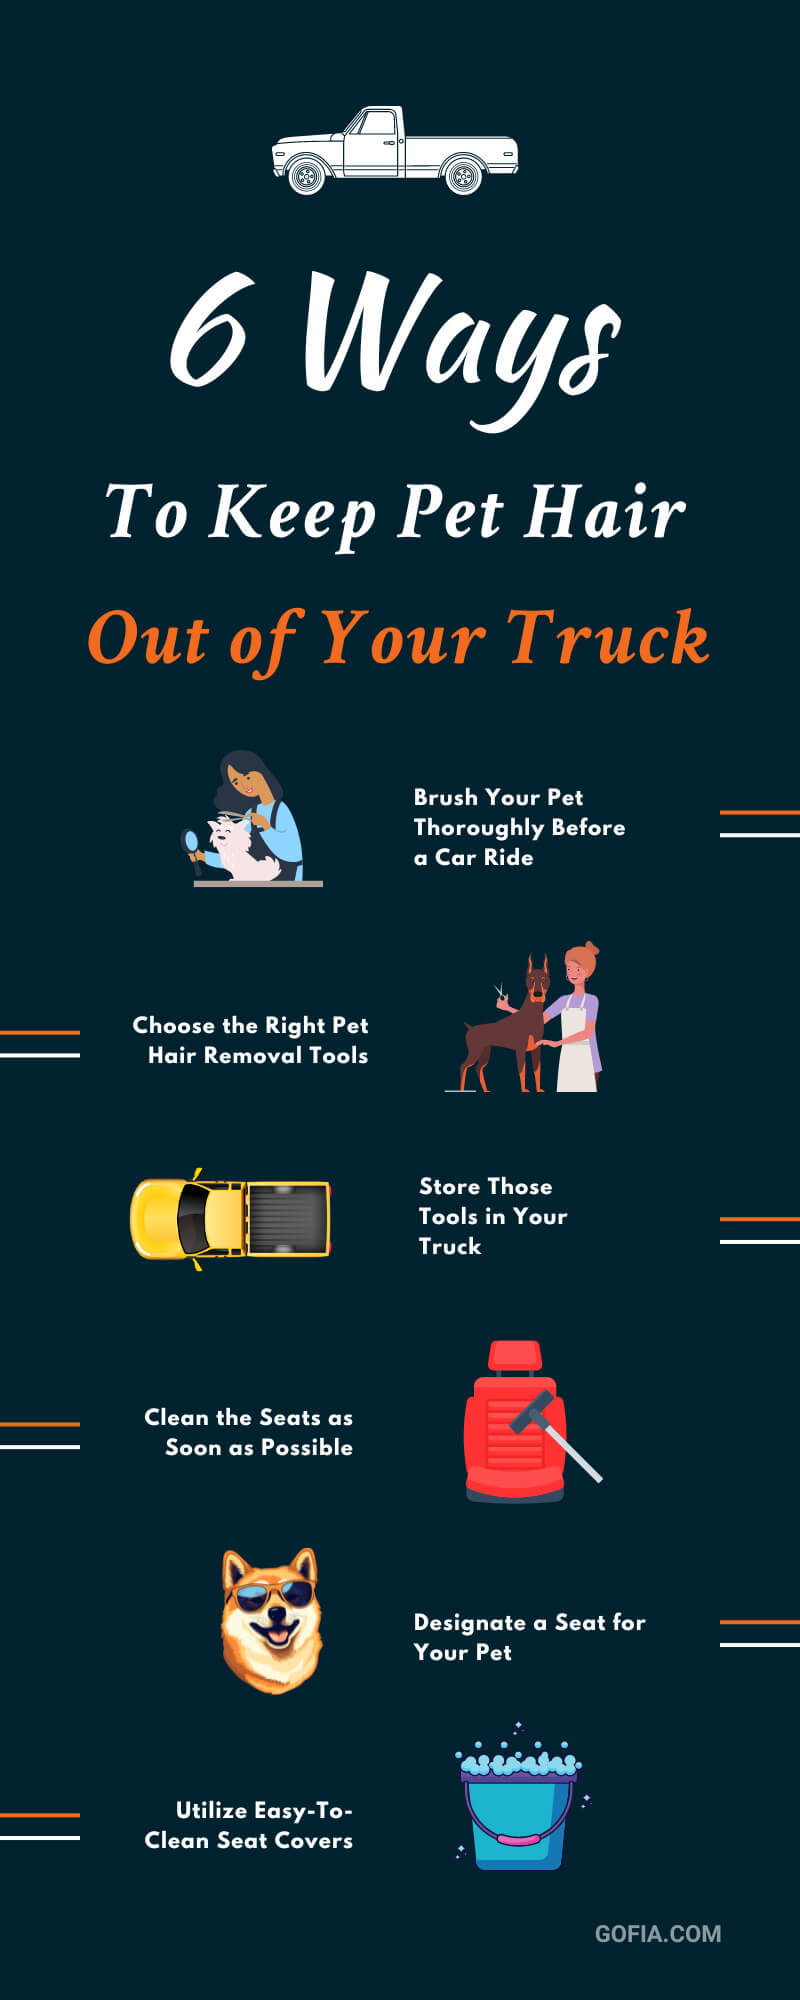 6 Ways To Keep Pet Hair Out of Your Truck